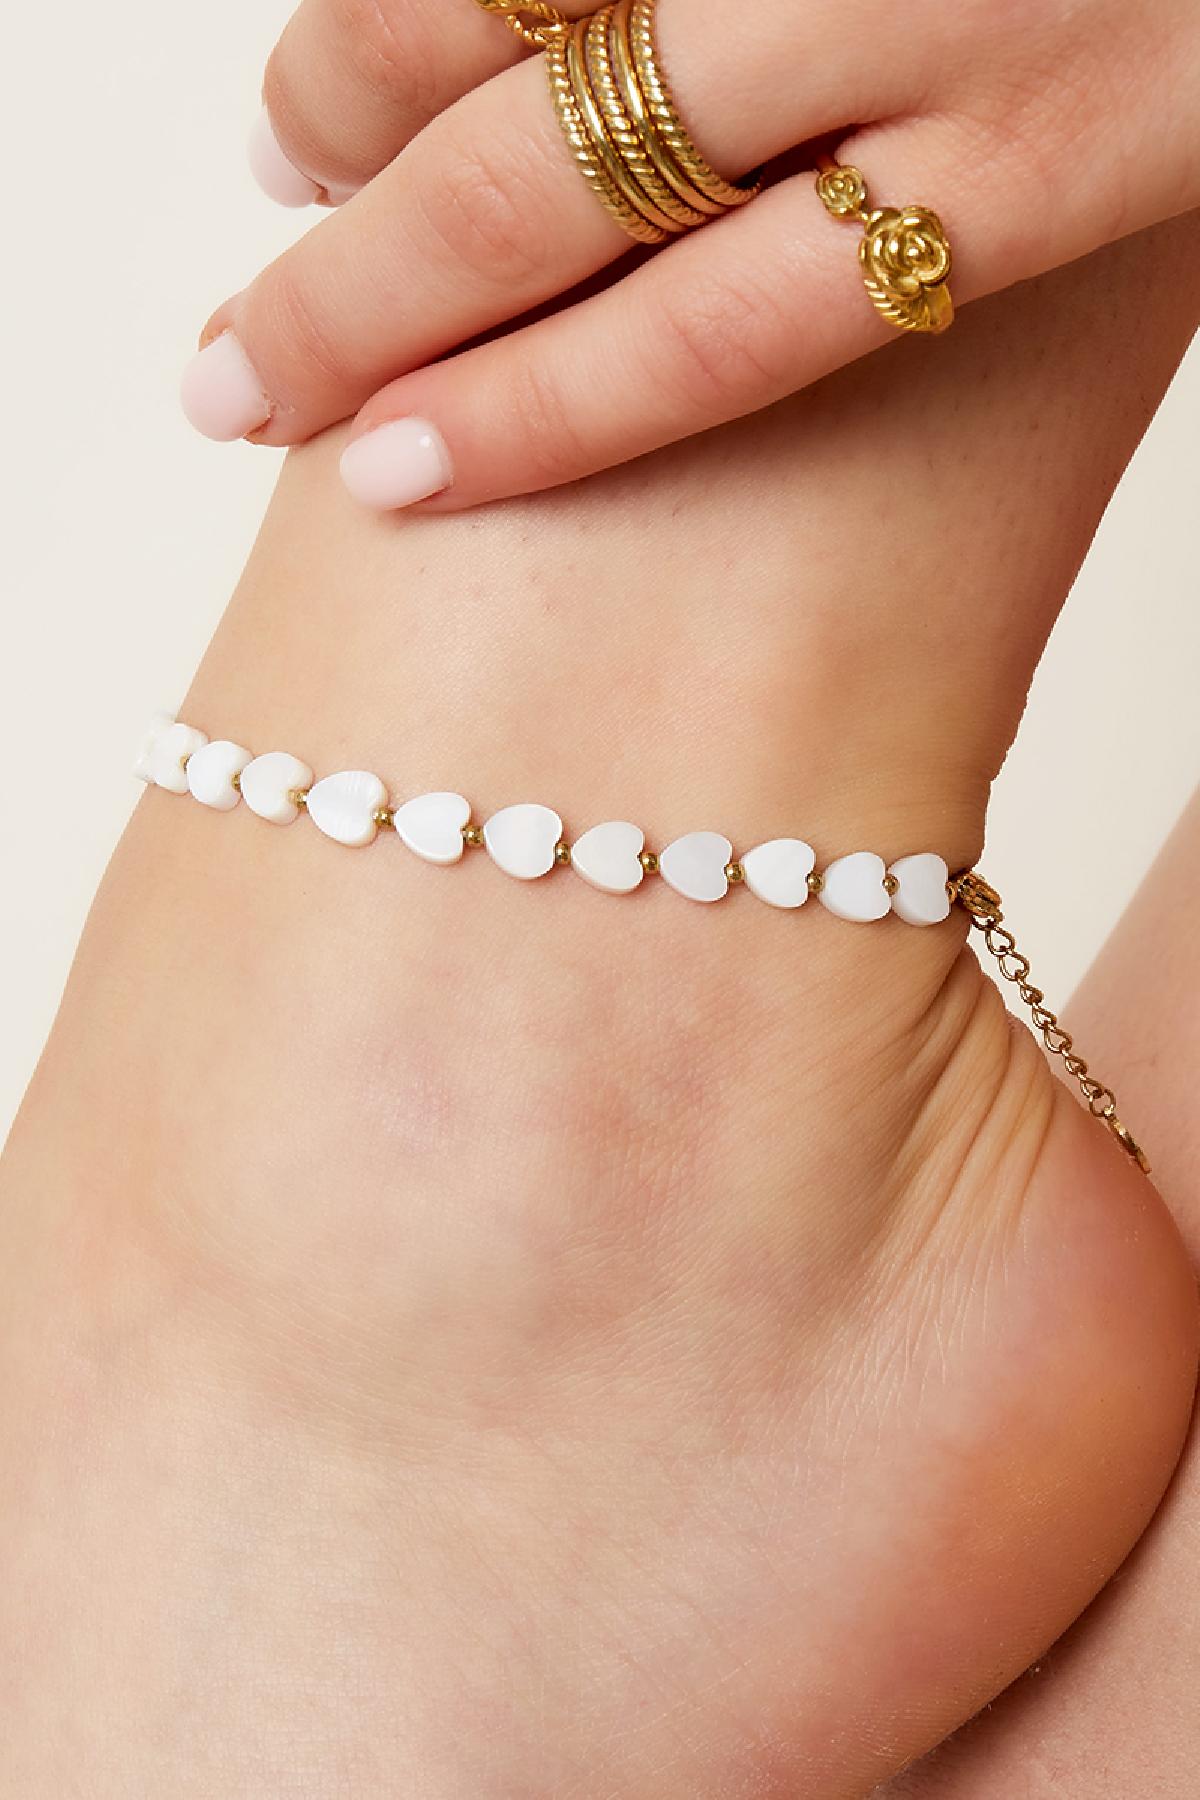 Heart anklet - Beach collection White gold Sea Shells Picture4